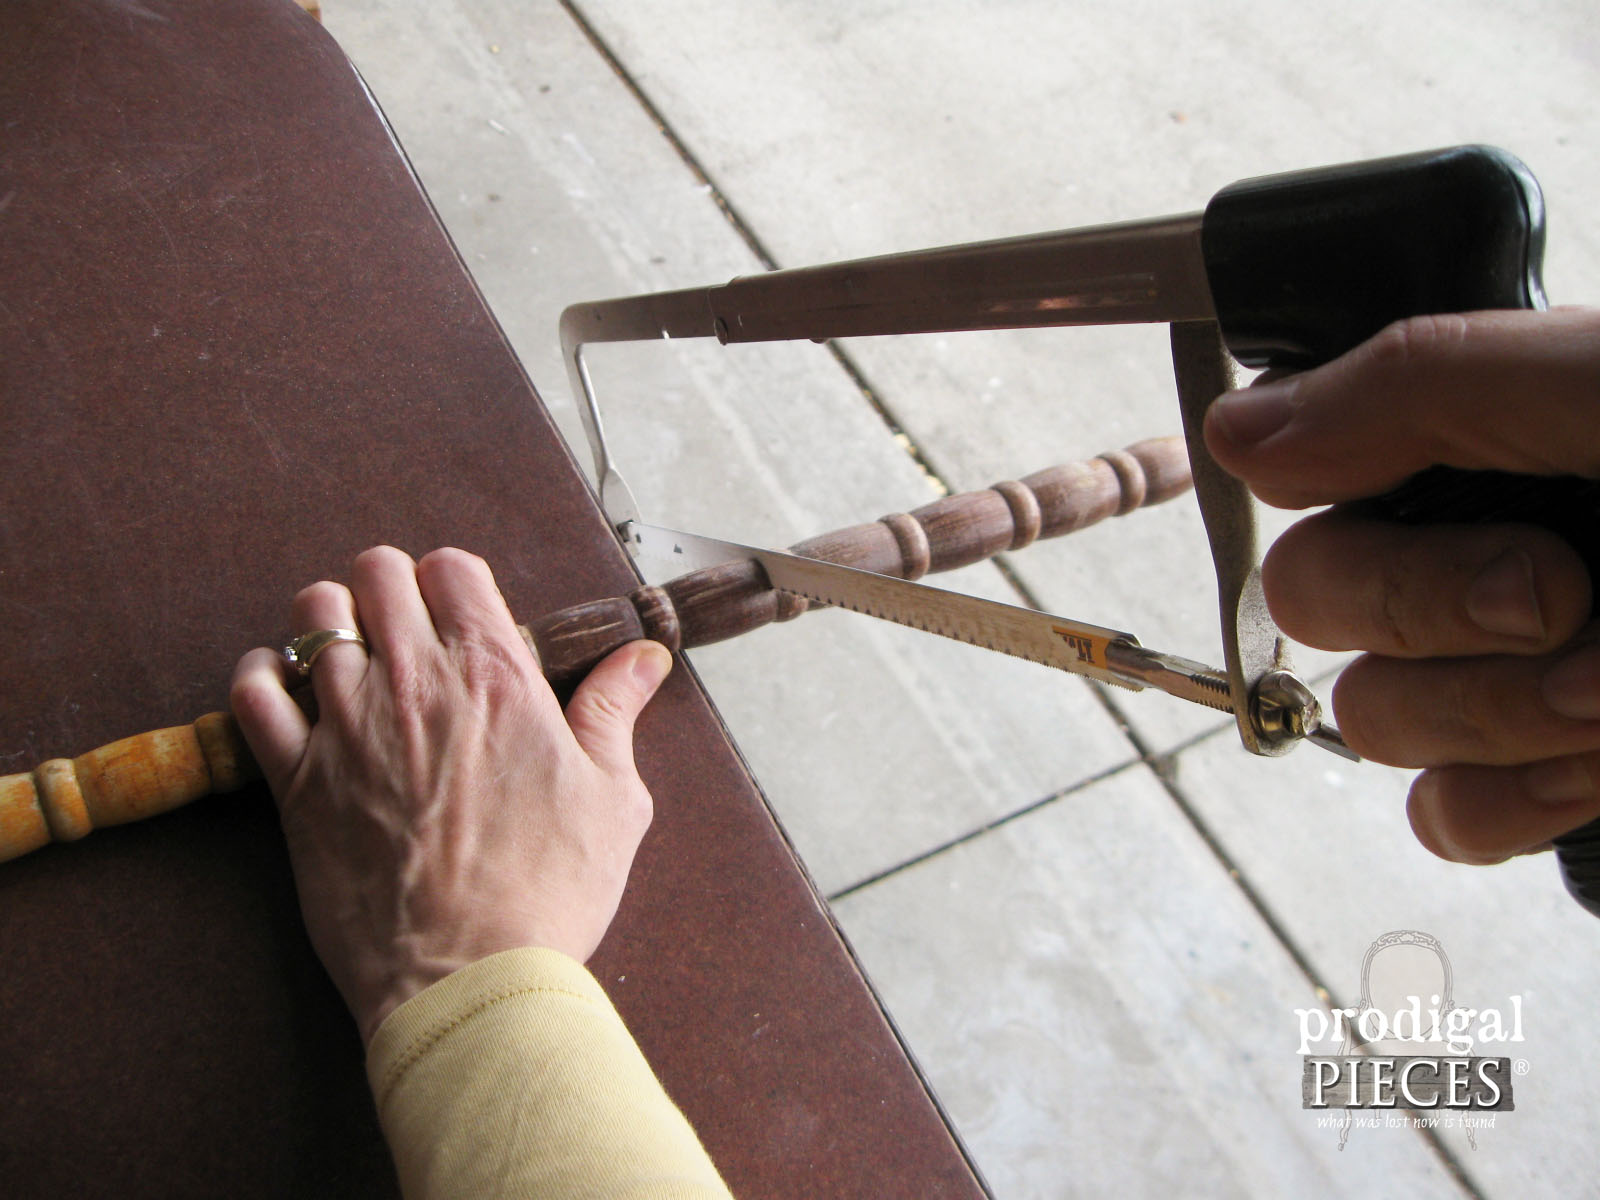 Cutting Crib Spindle with Hacksaw for Easter Cross | Prodigal Pieces | prodigalpieces.com